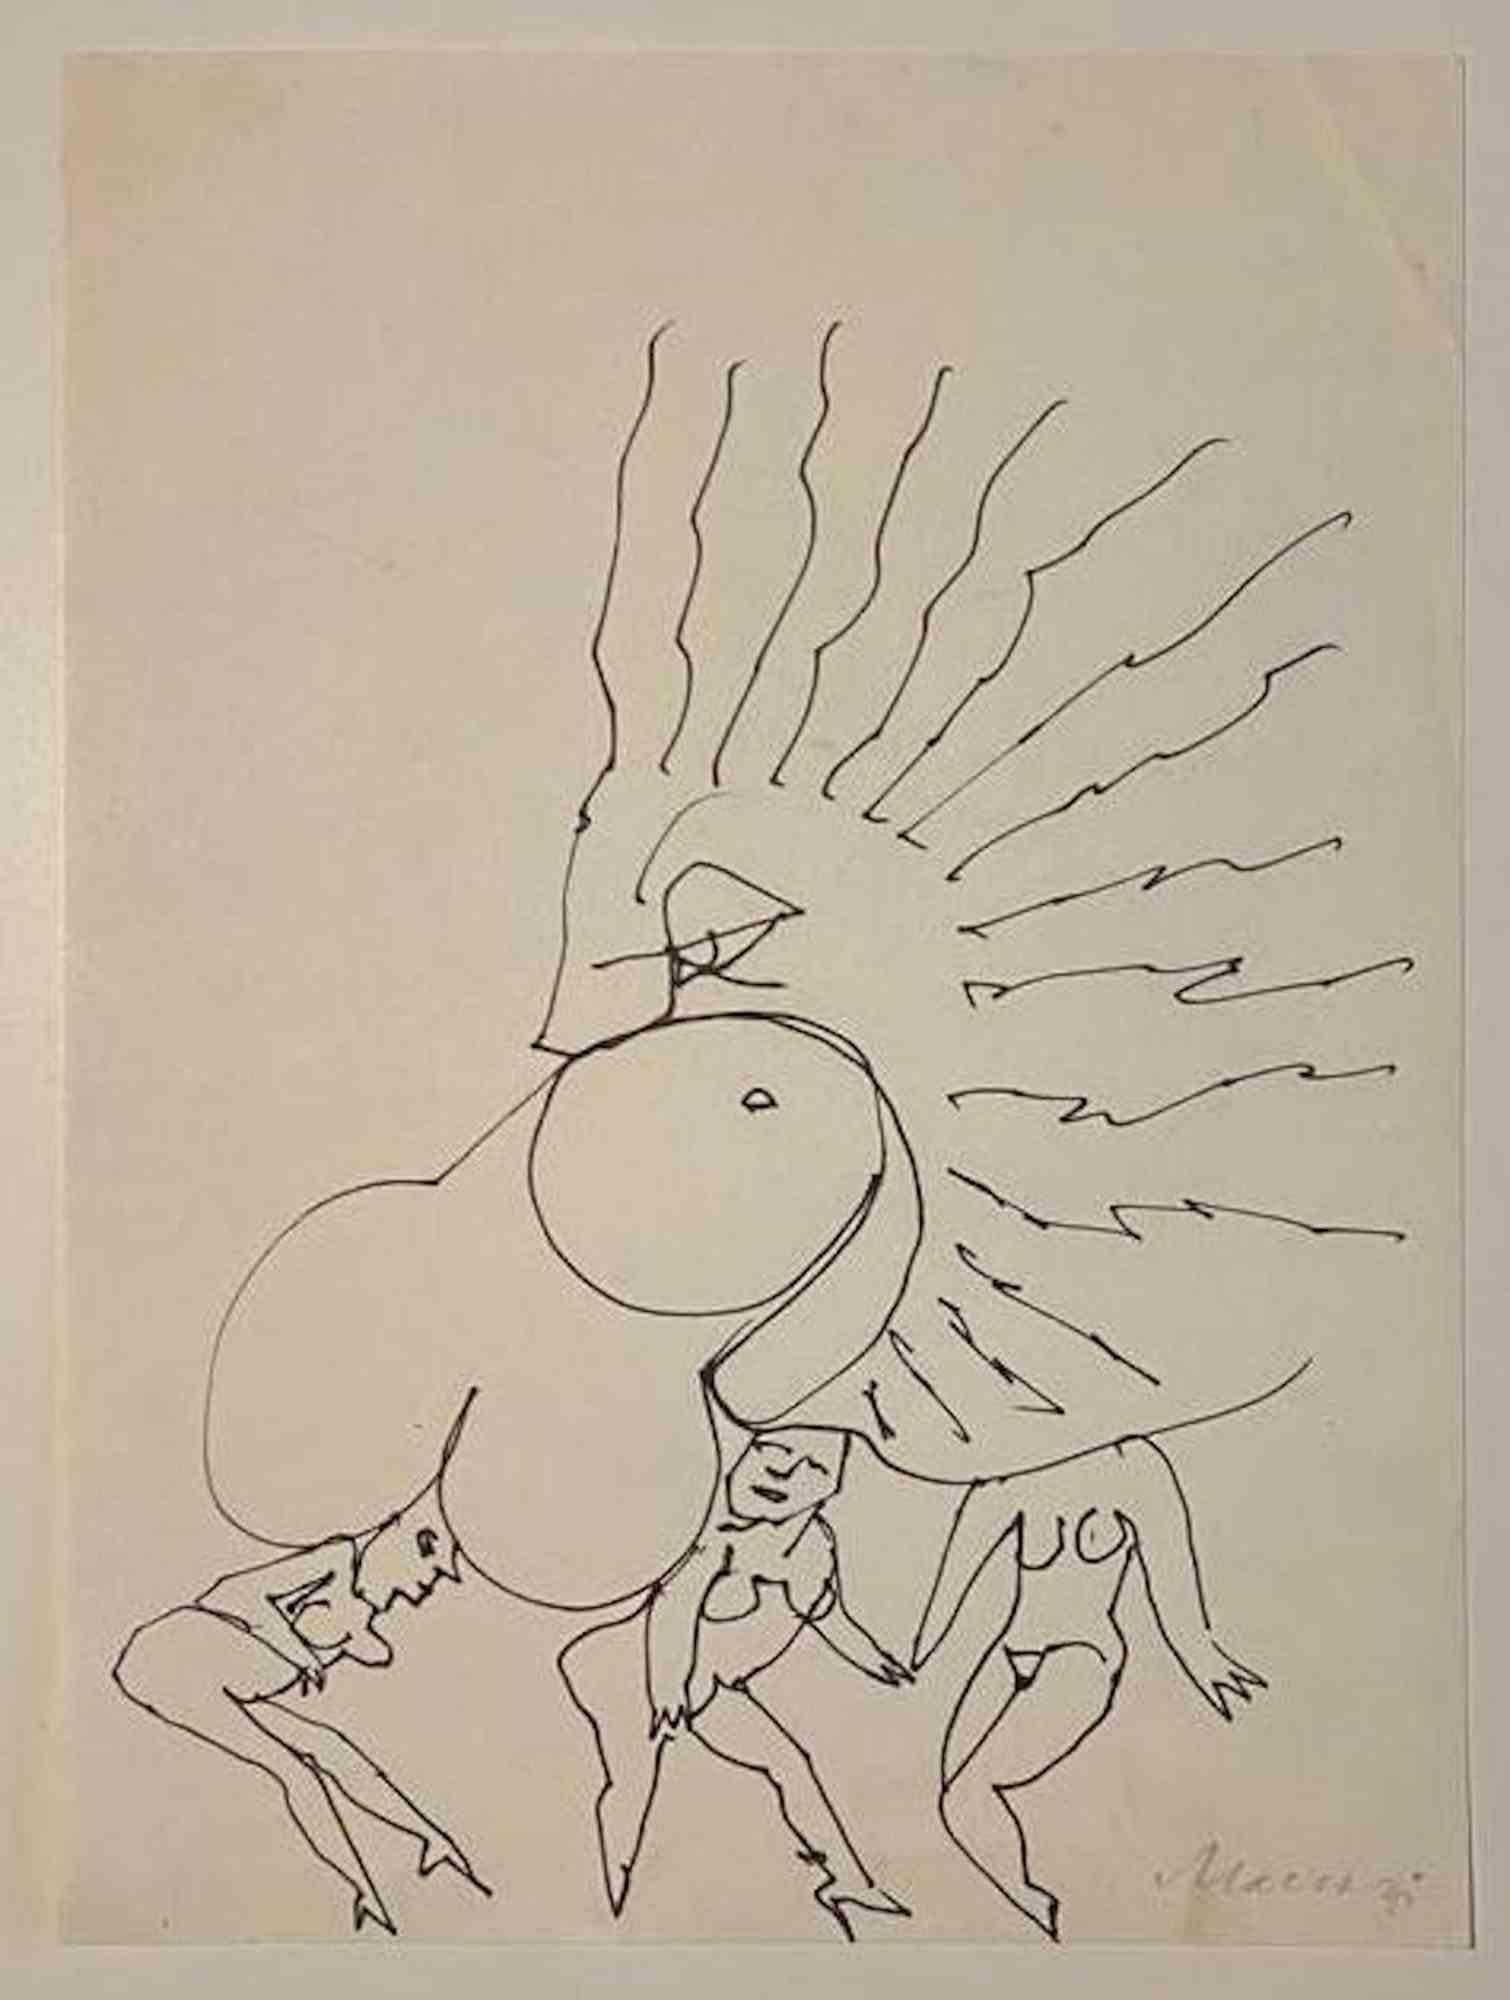 The Sun is a pen Drawing realized by Mino Maccari  (1924-1989) in the Mid-20th Century.

Hand-signed on the lower.

Good conditions.

Mino Maccari (Siena, 1924-Rome, June 16, 1989) was an Italian writer, painter, engraver and journalist, winner of